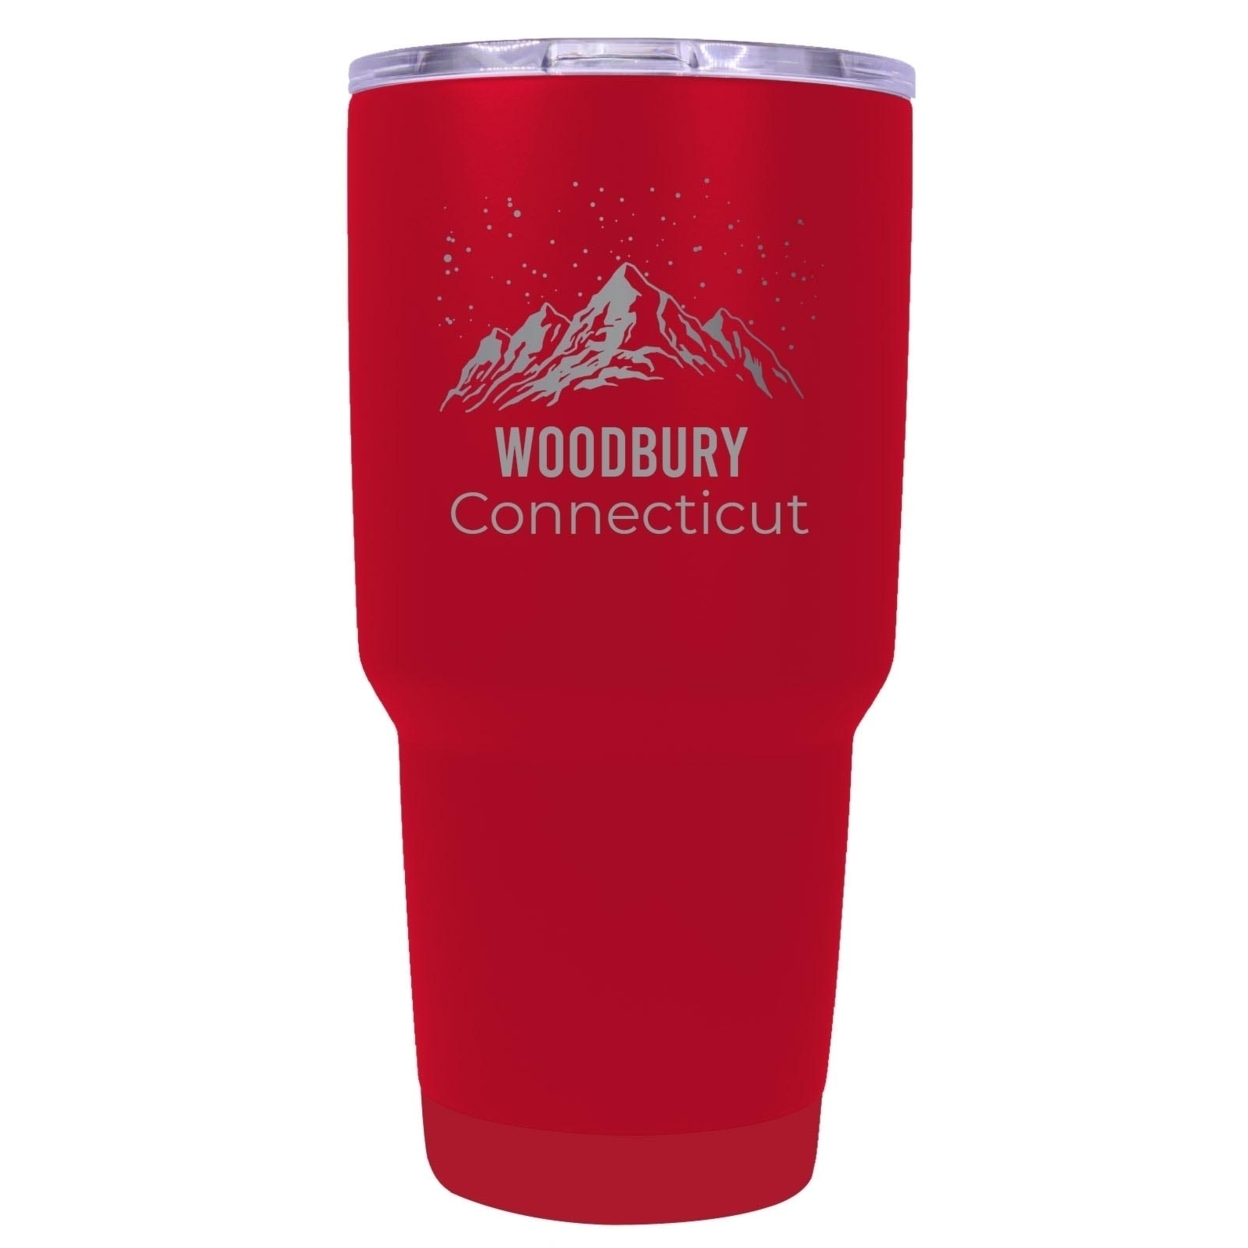 Woodbury Connecticut Ski Snowboard Winter Souvenir Laser Engraved 24 Oz Insulated Stainless Steel Tumbler - Red